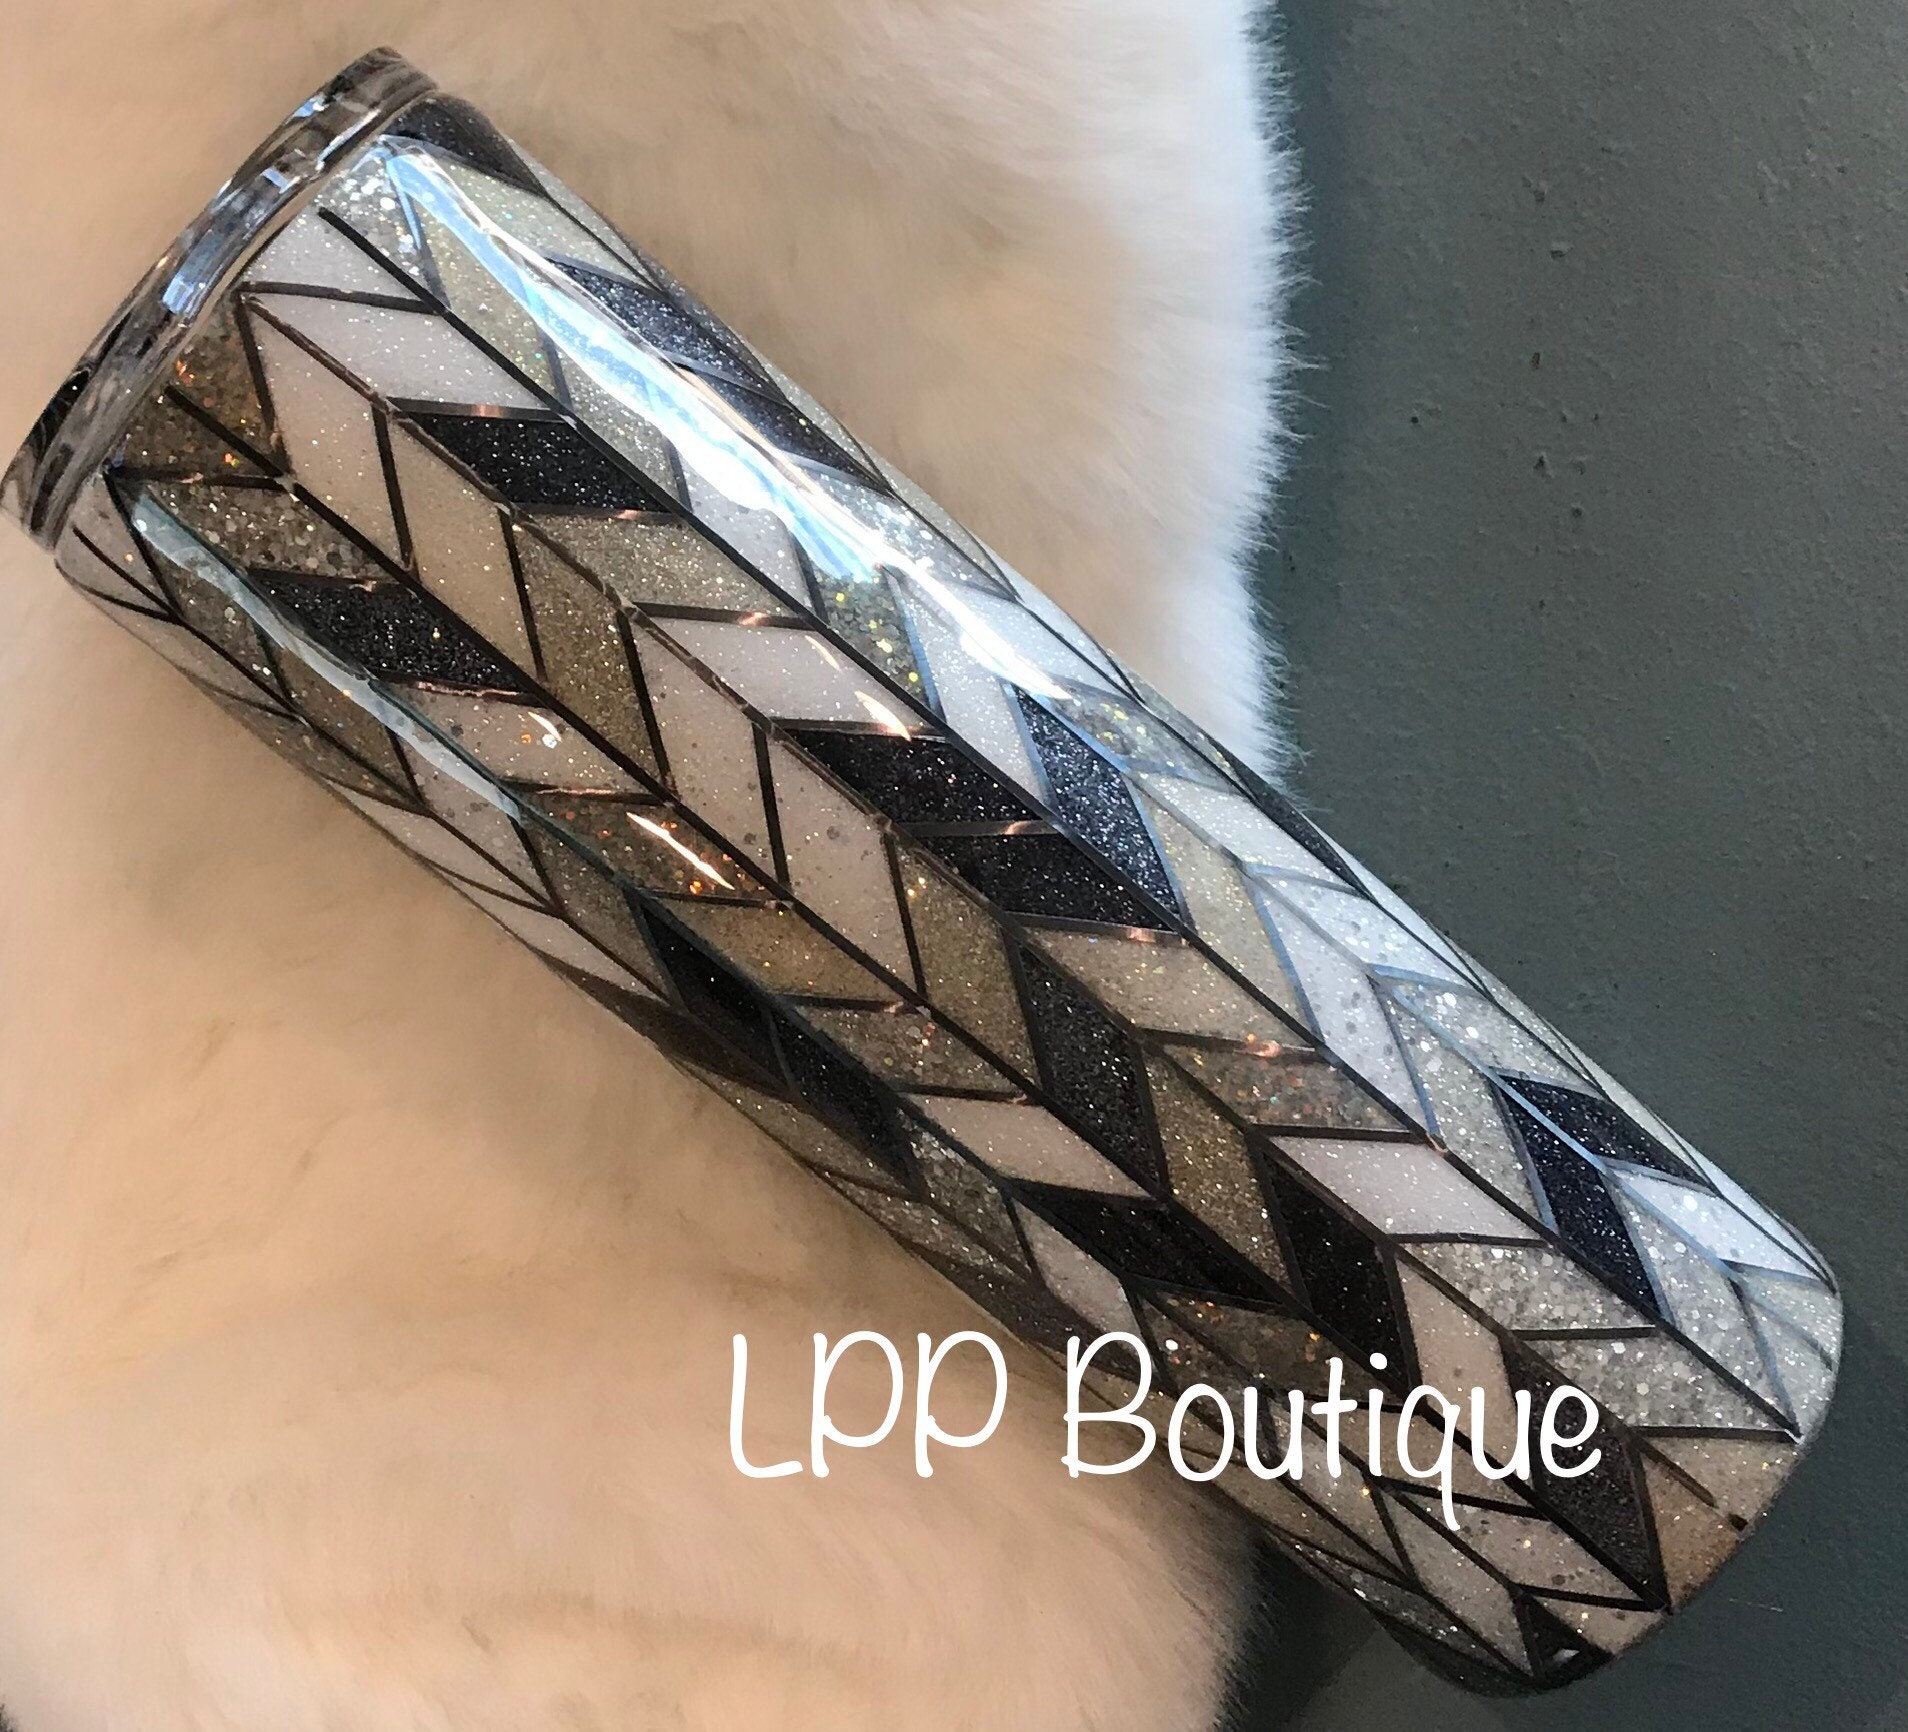 Psychotic Modifications - Louis Vuitton yeti Great gift for